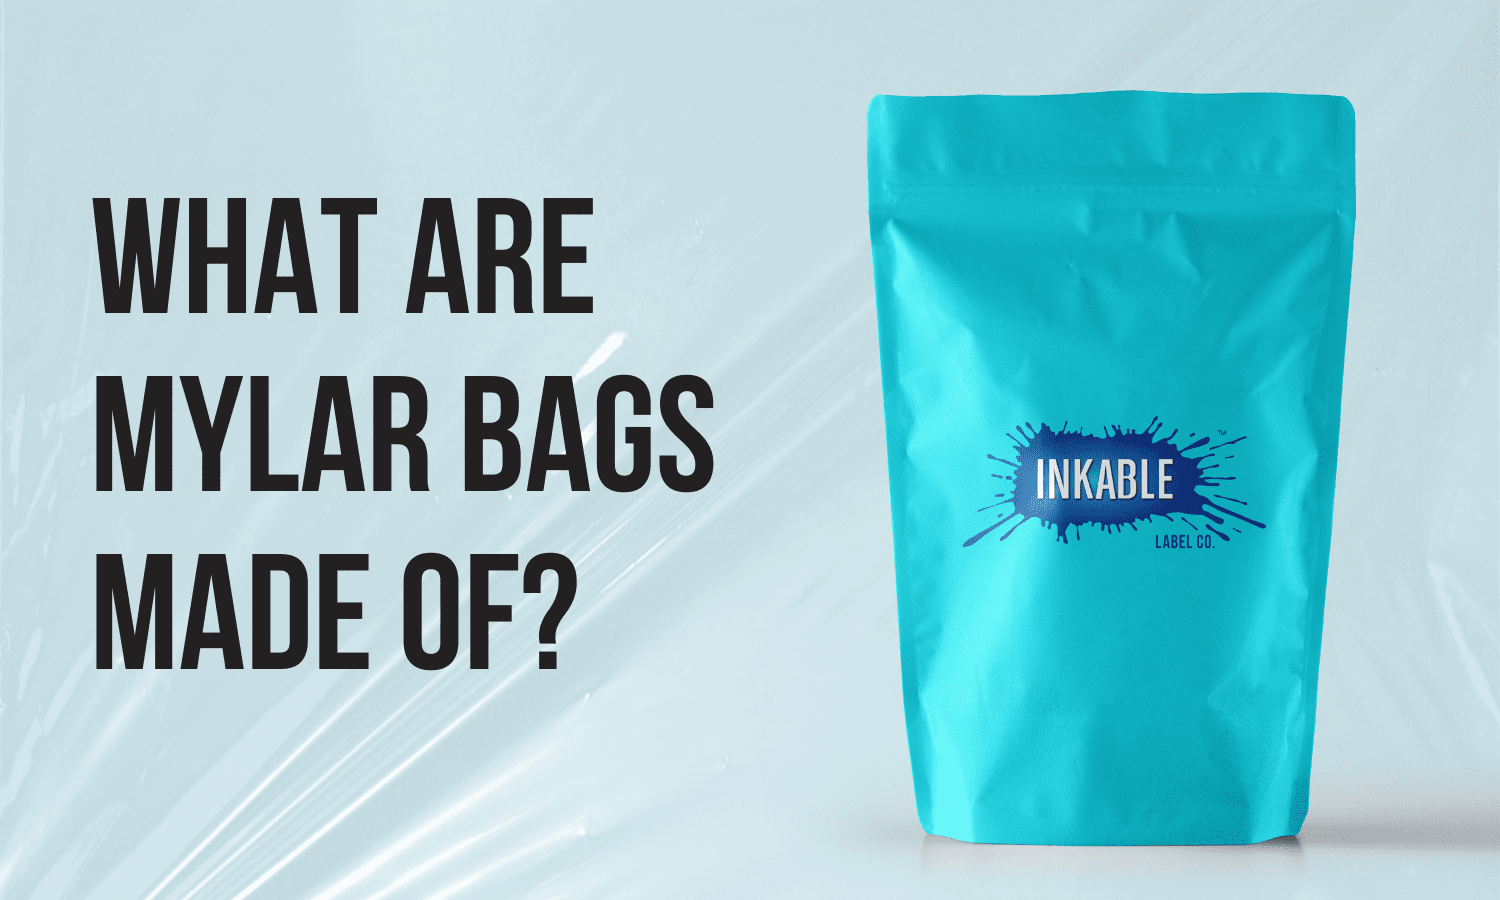 What Are Mylar Bags Made Of?